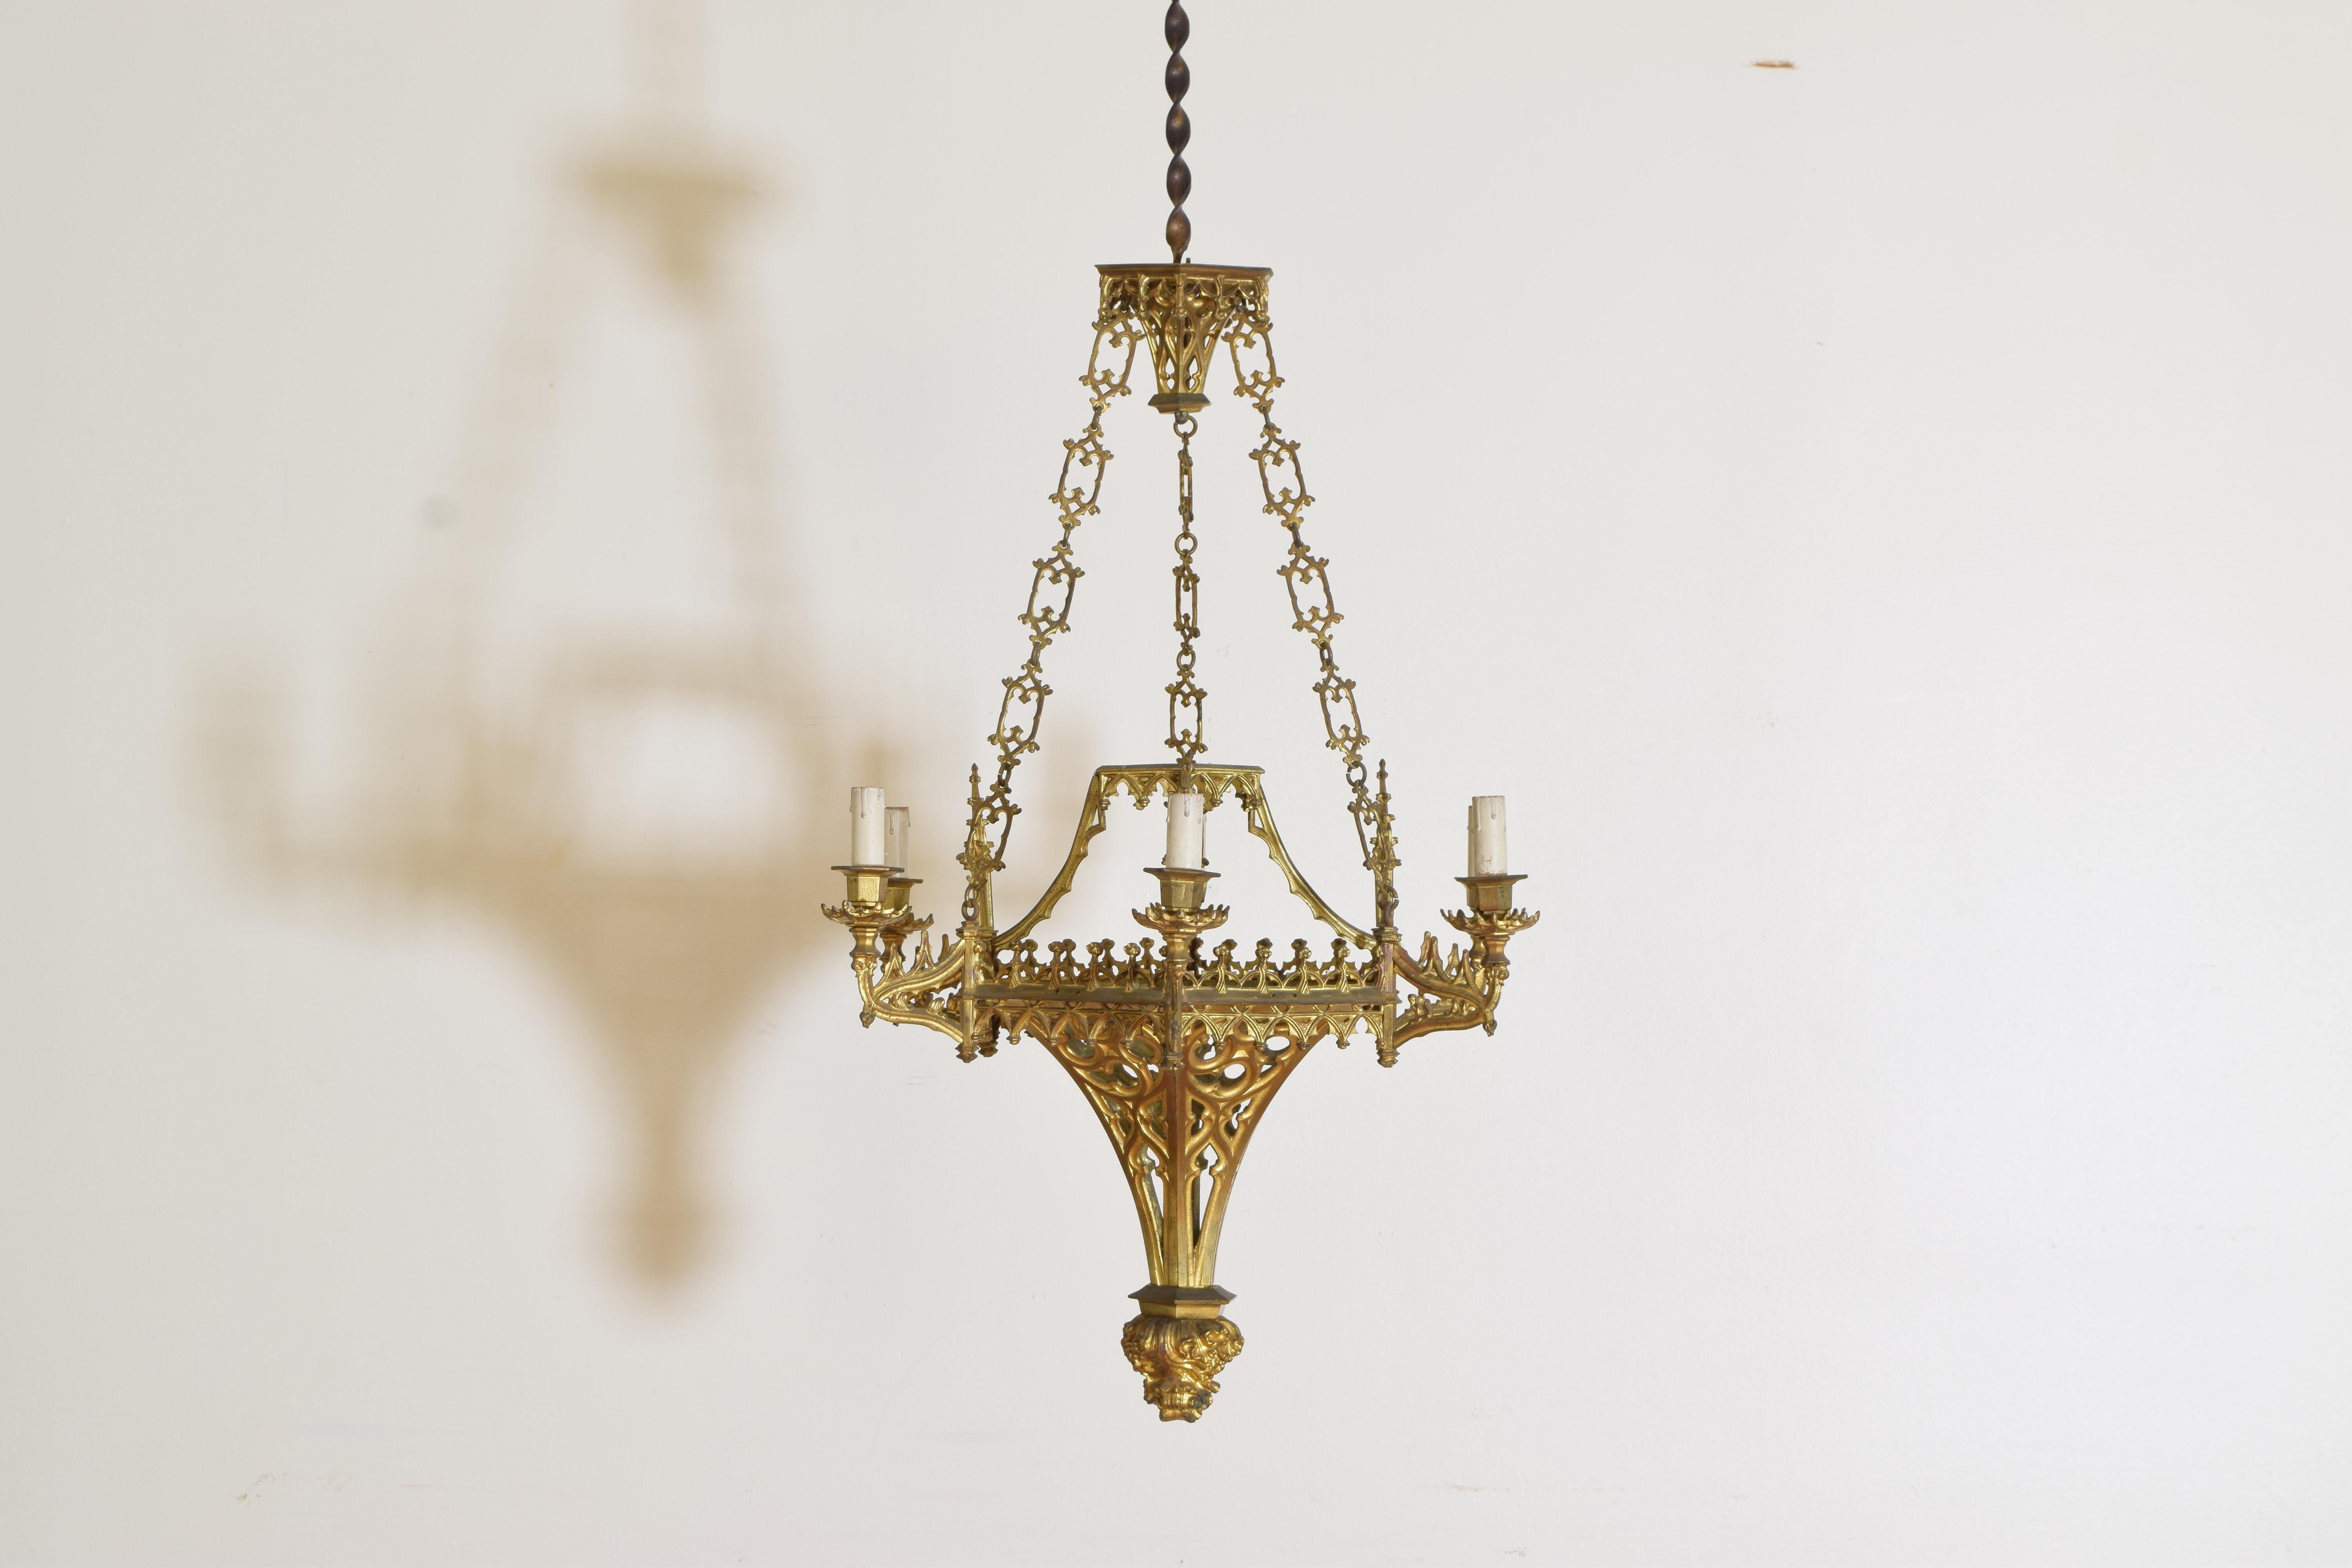 Italian, Milanese, Neogothic Gilt Brass 6-Light Chandelier, Late 19th Century In Good Condition For Sale In Atlanta, GA